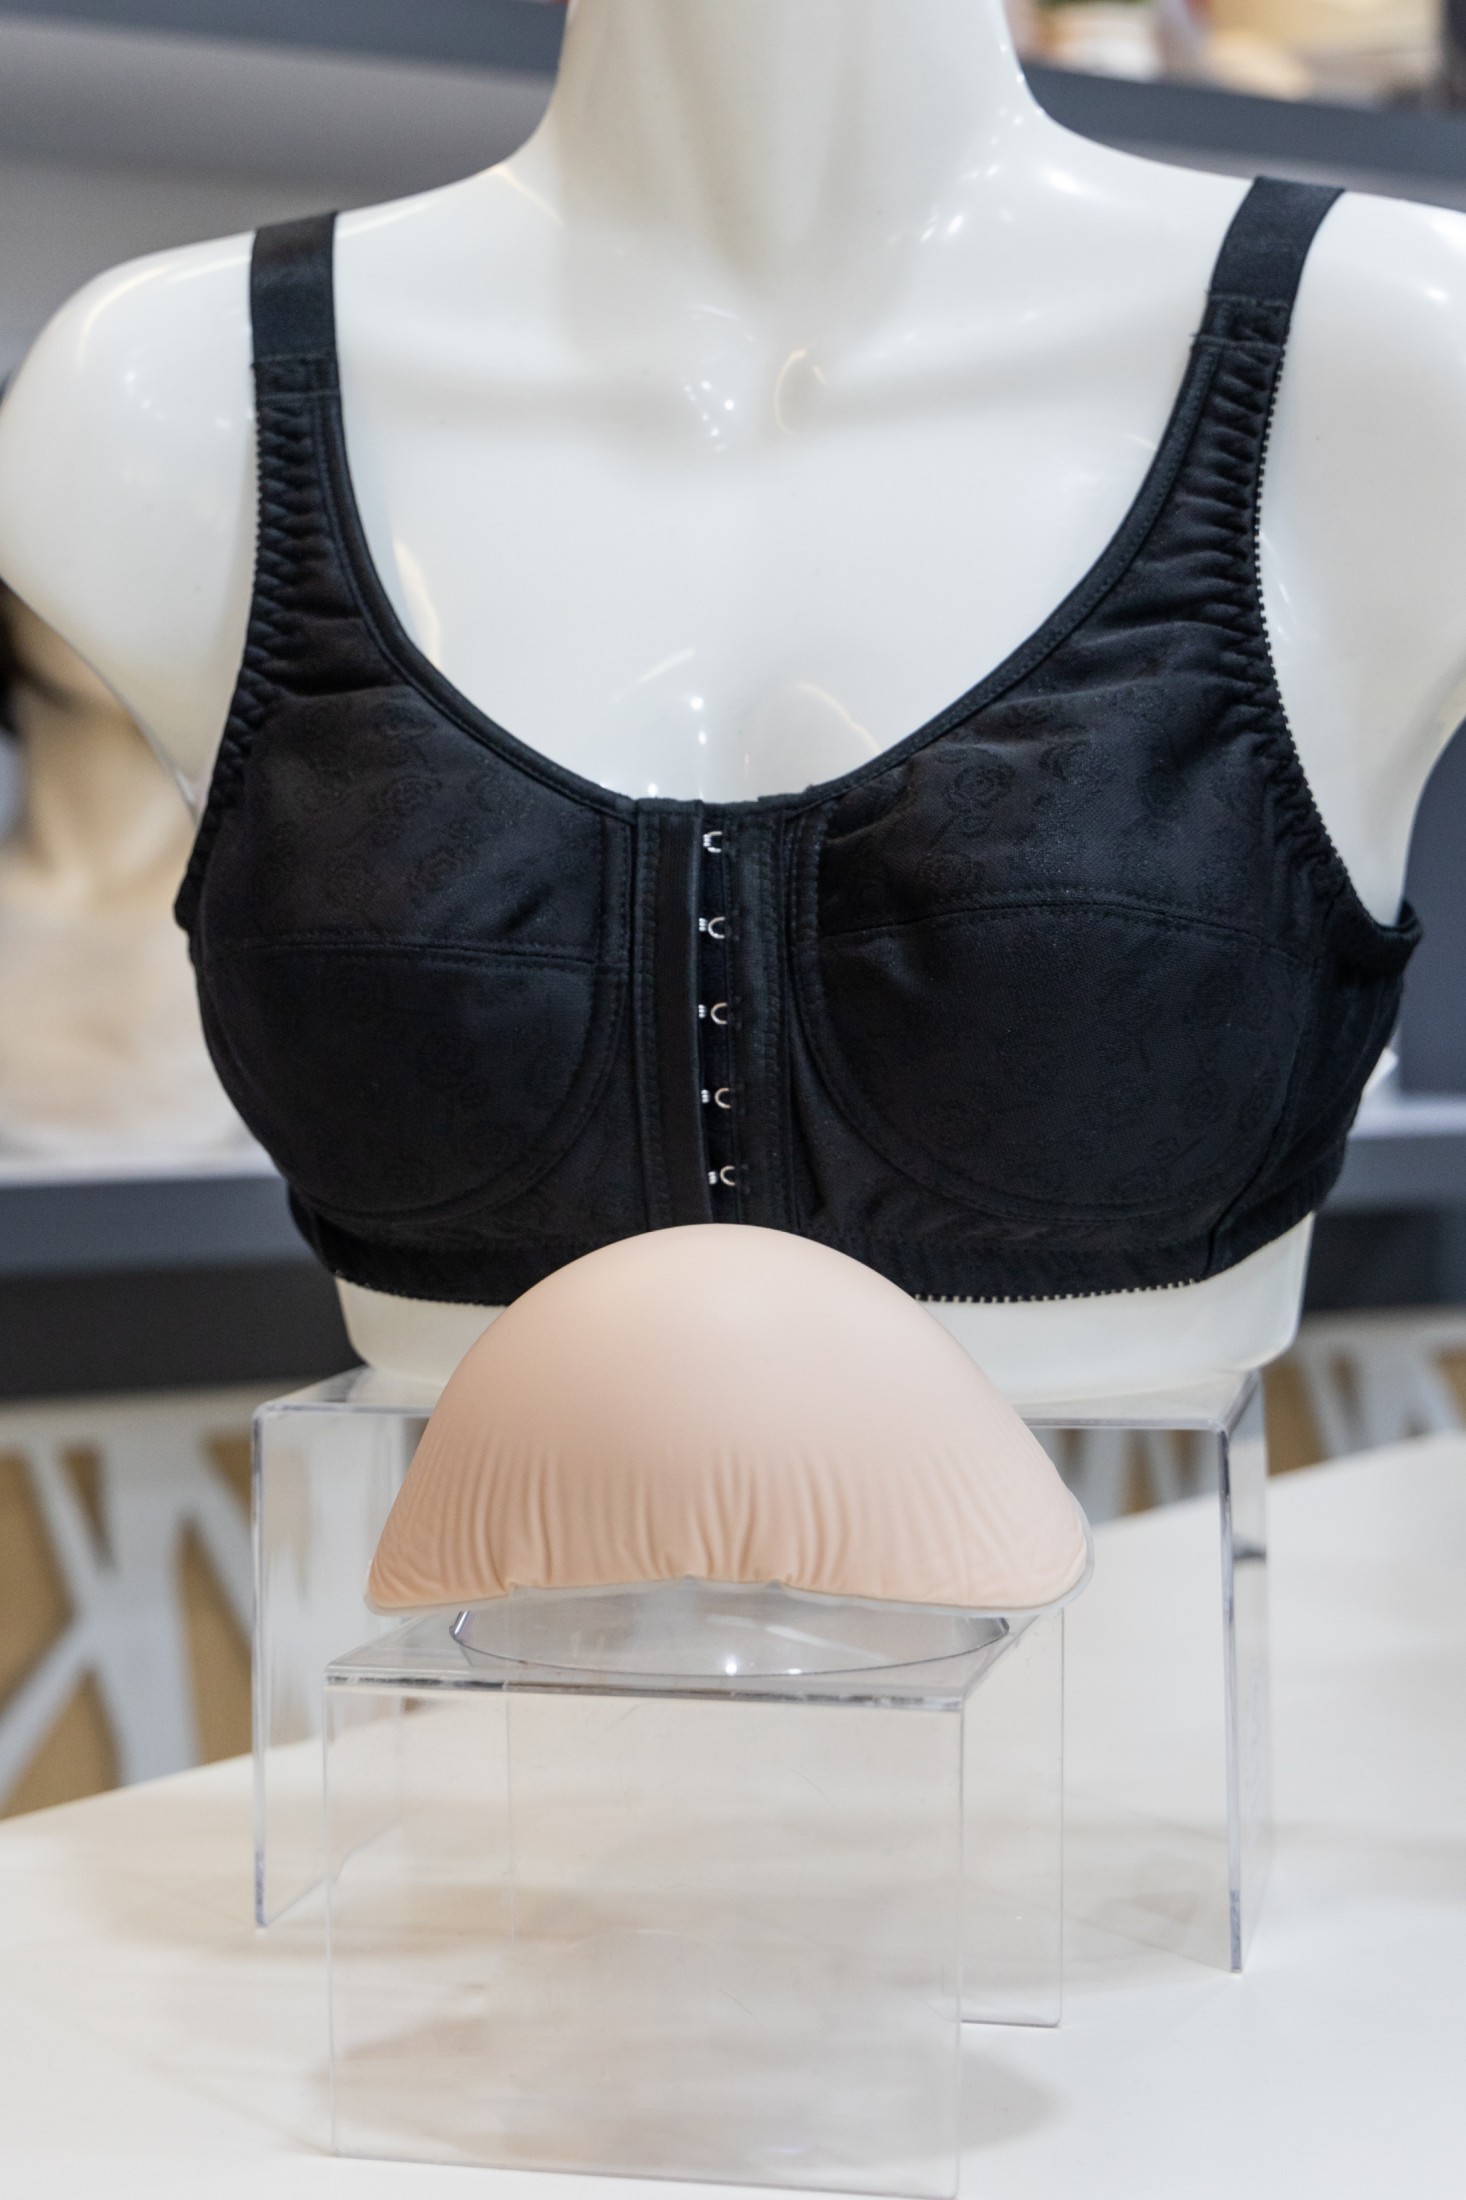 Breast Forms at  - Bras